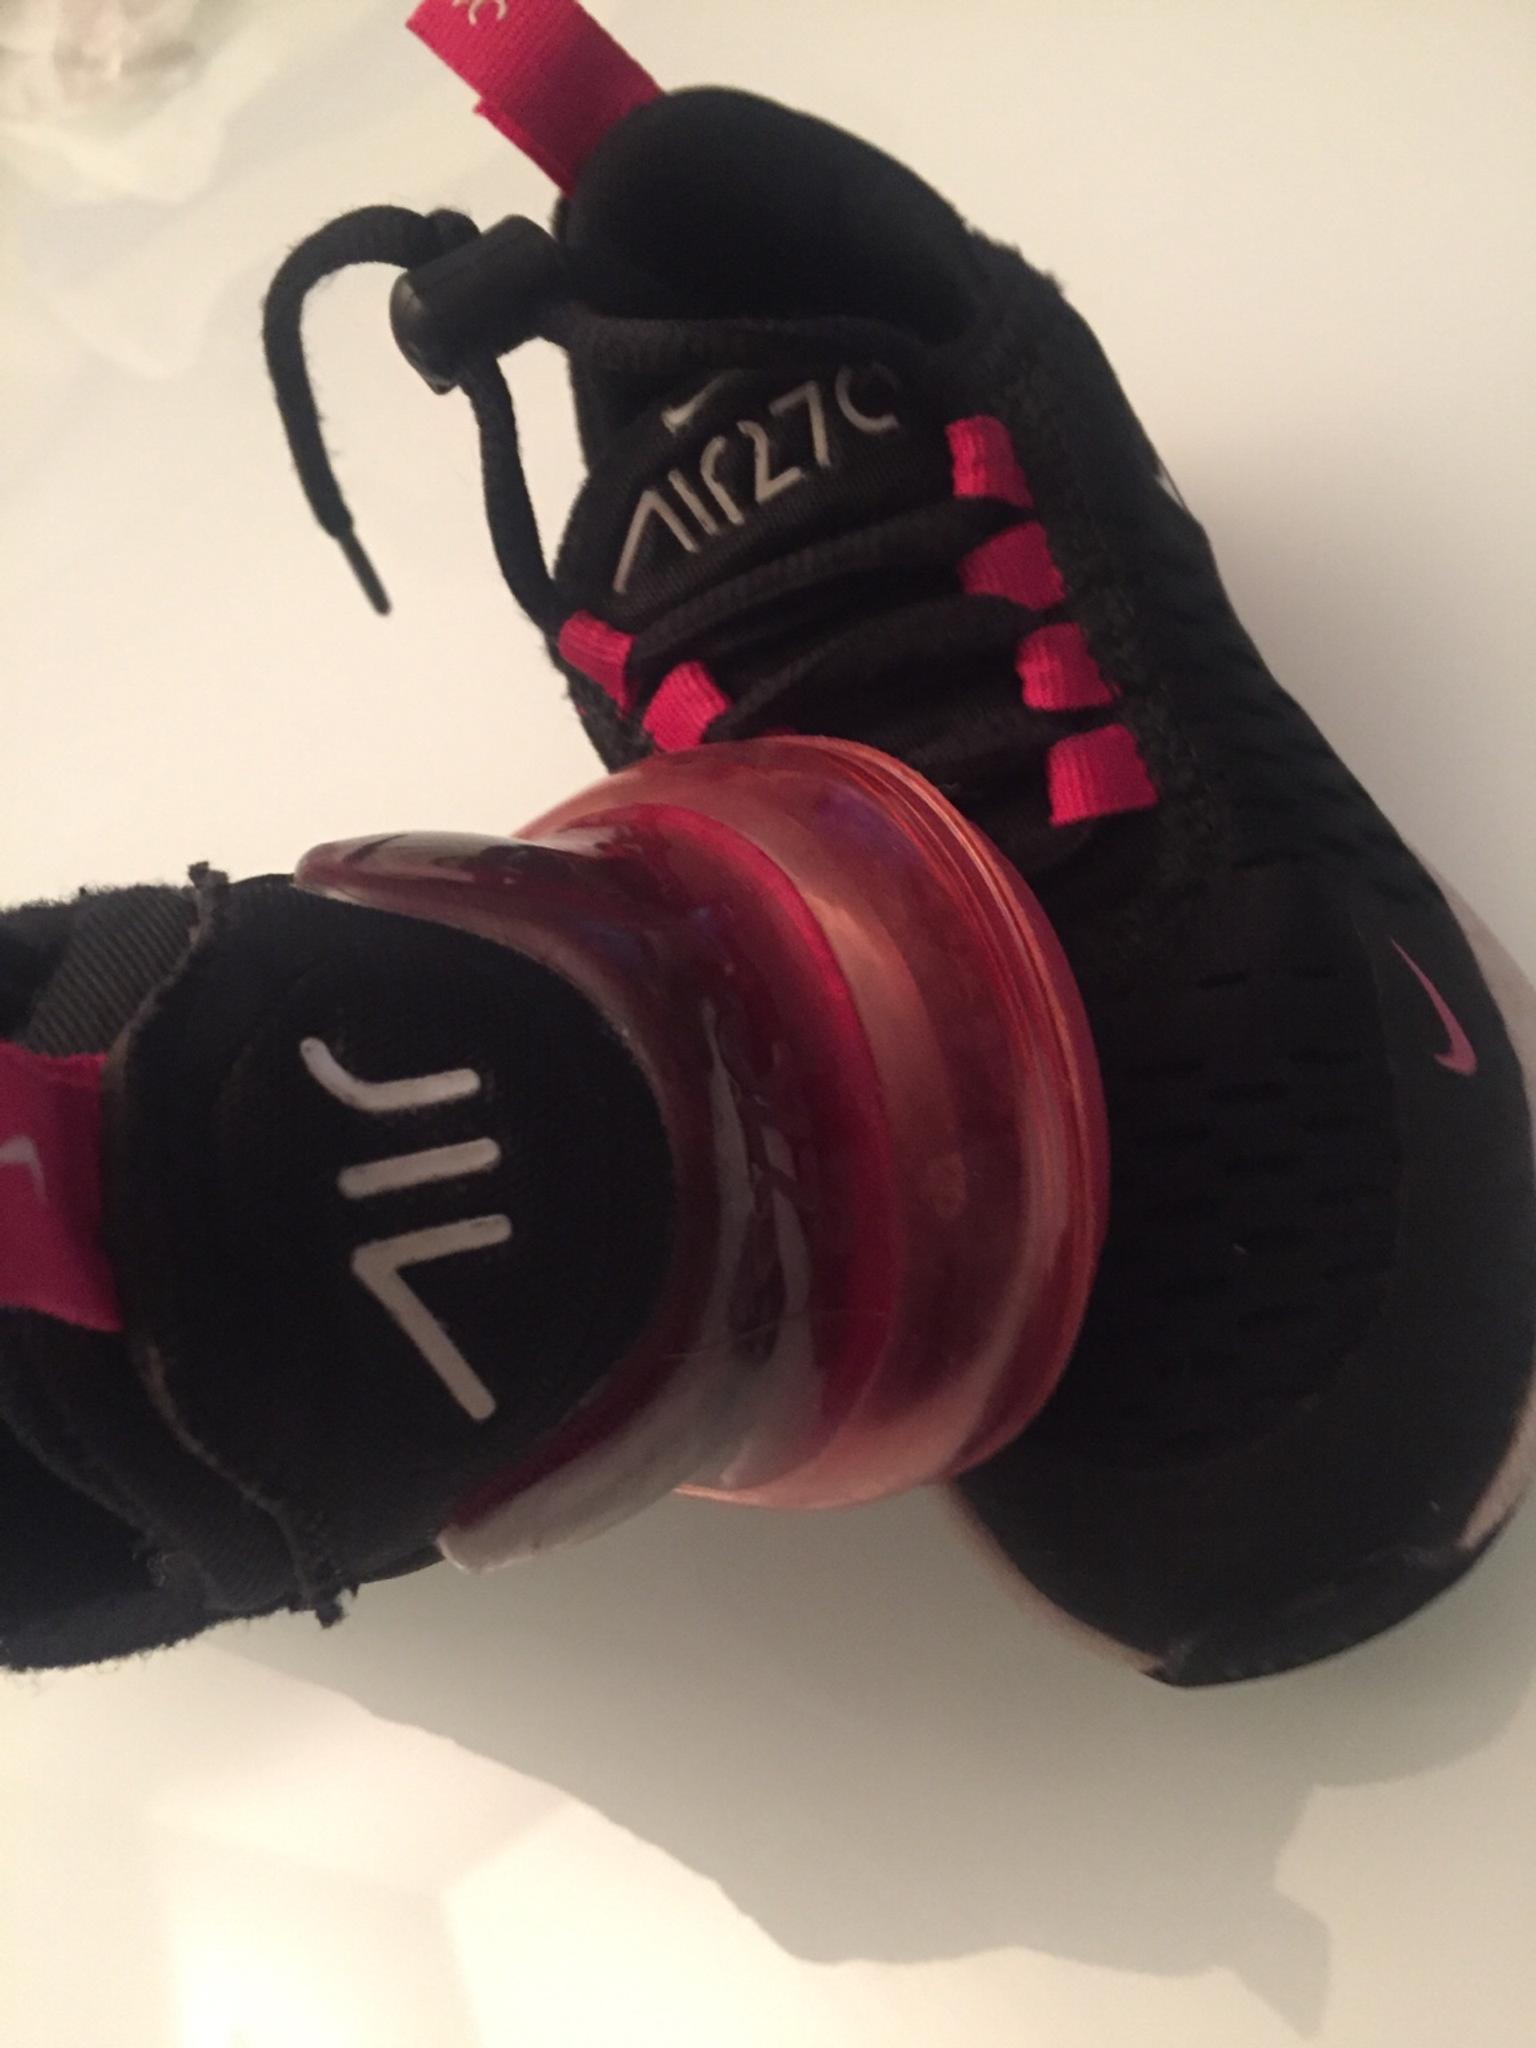 Nike C27 in 20152 Milano for €10.00 for sale | Shpock